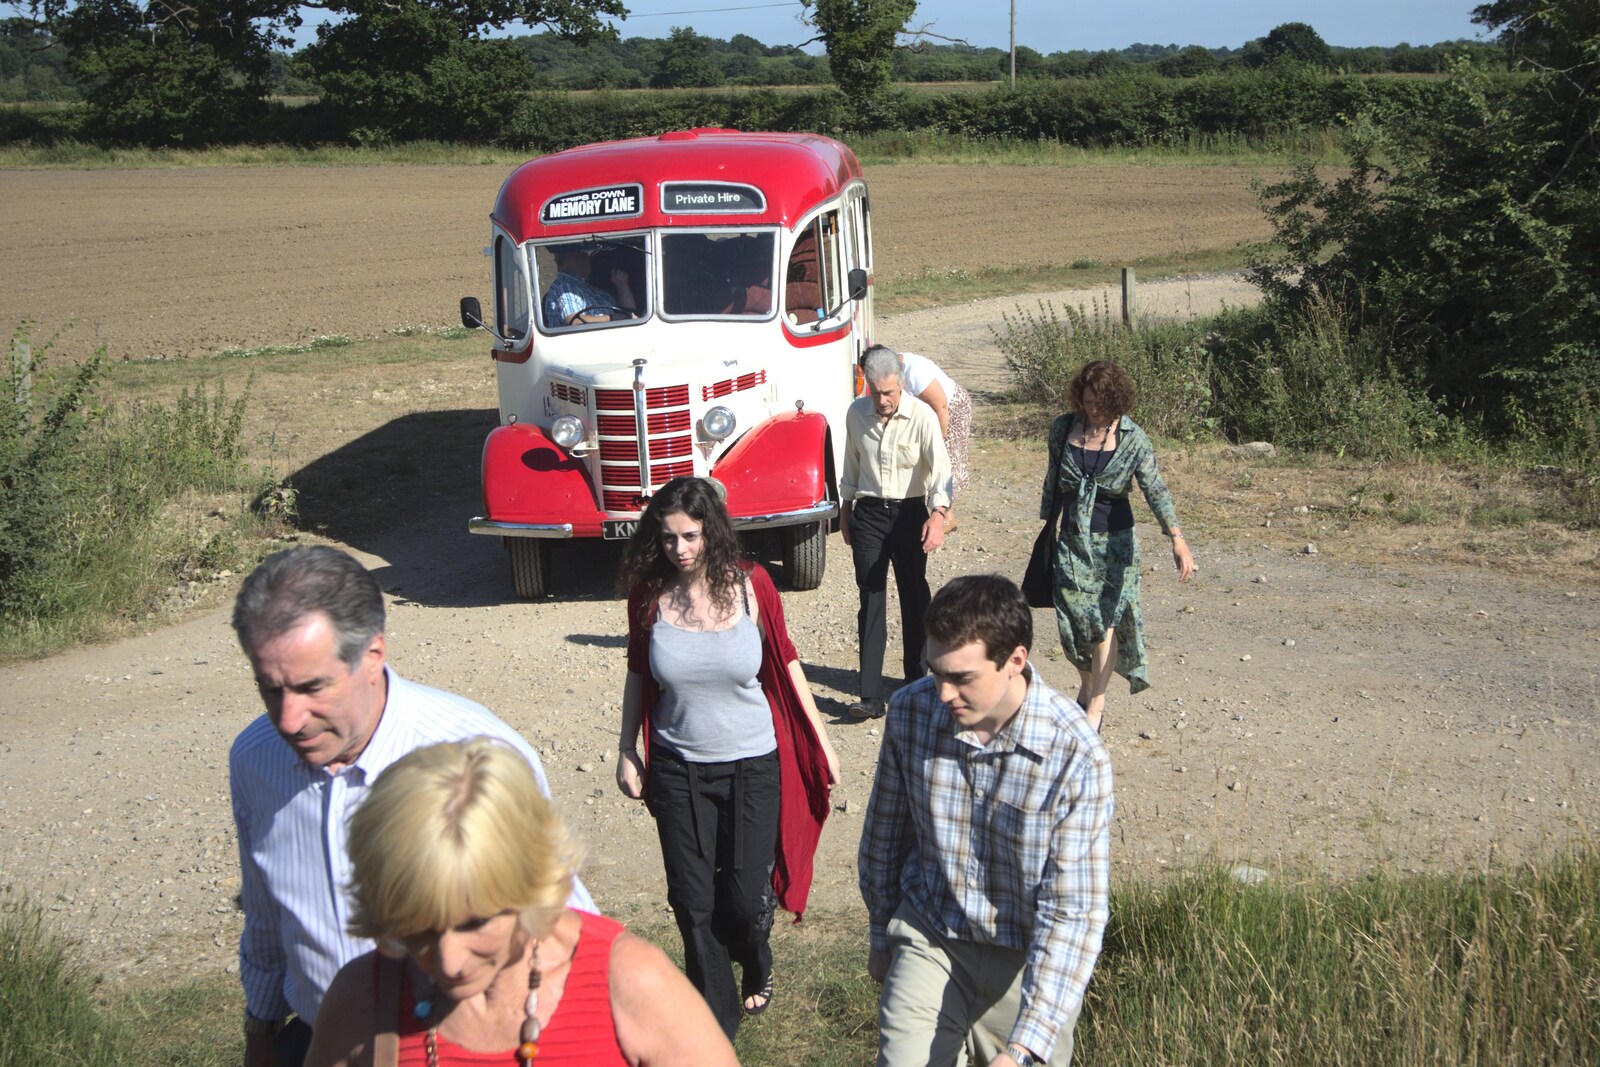 The bus drops off more people from Clive and Suzanne's Wedding, Oakley and Brome, Suffolk - 10th July 2010